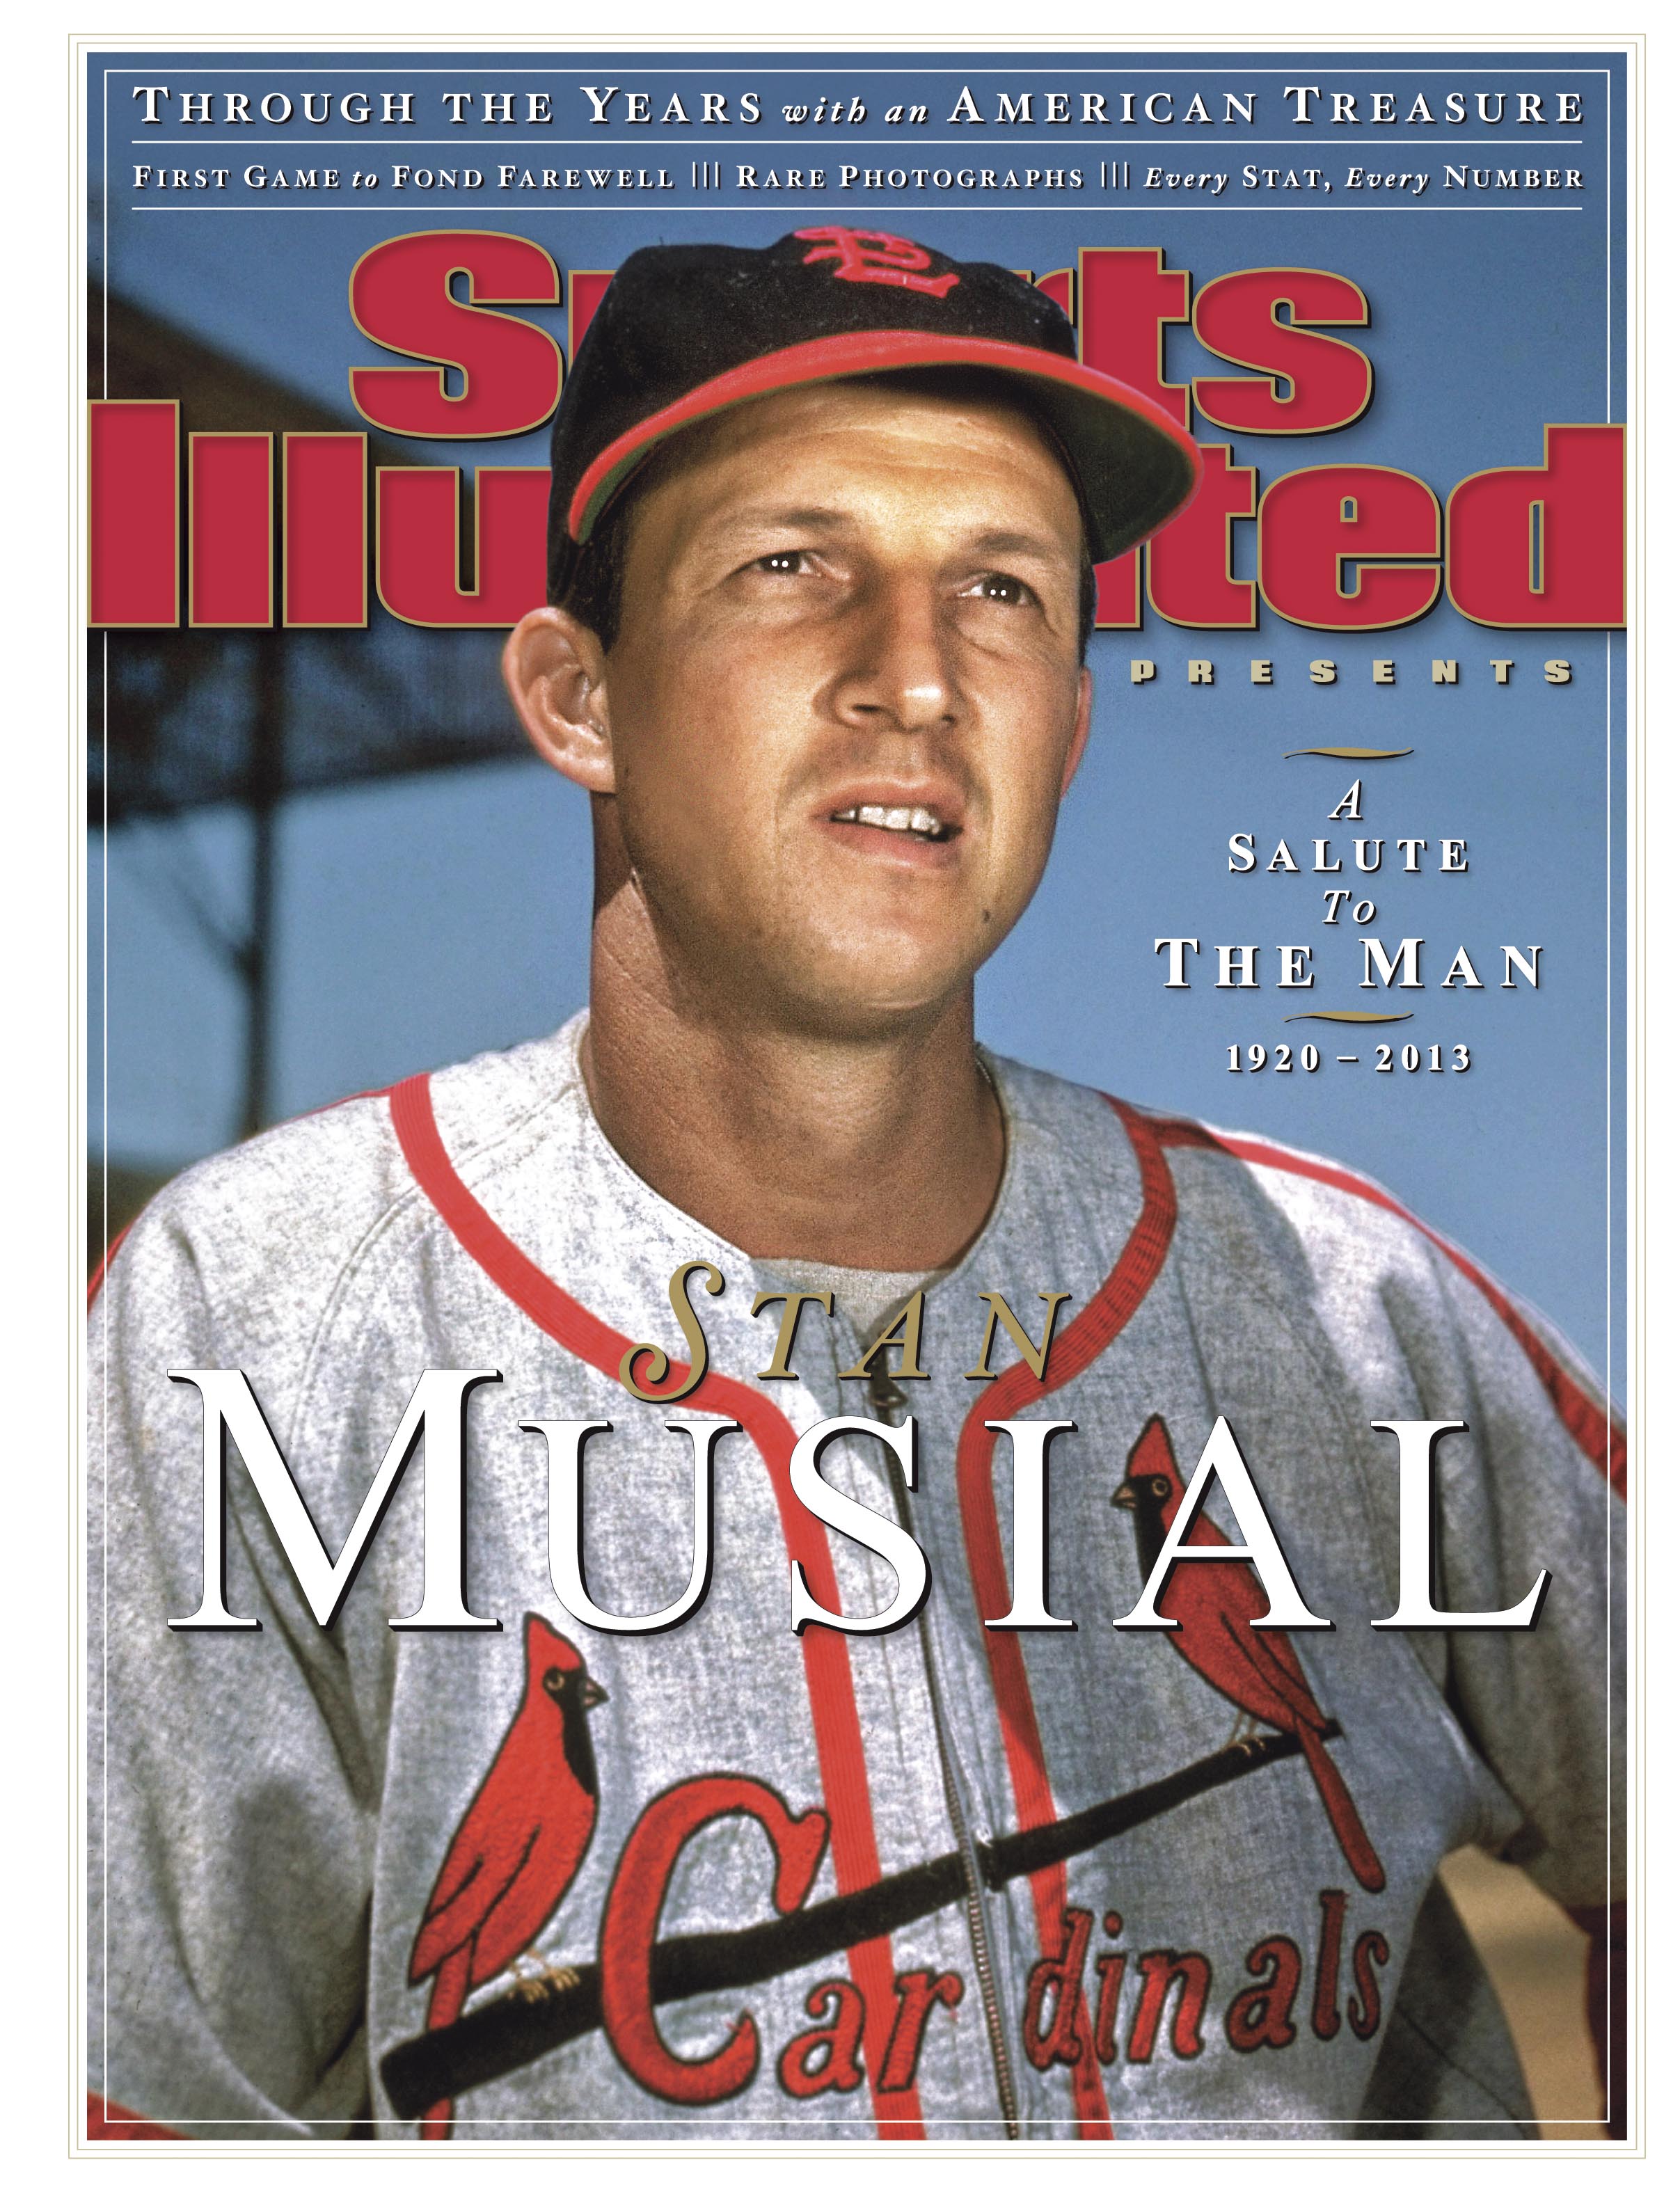 25 Most Valuable Stan Musial Baseball Cards